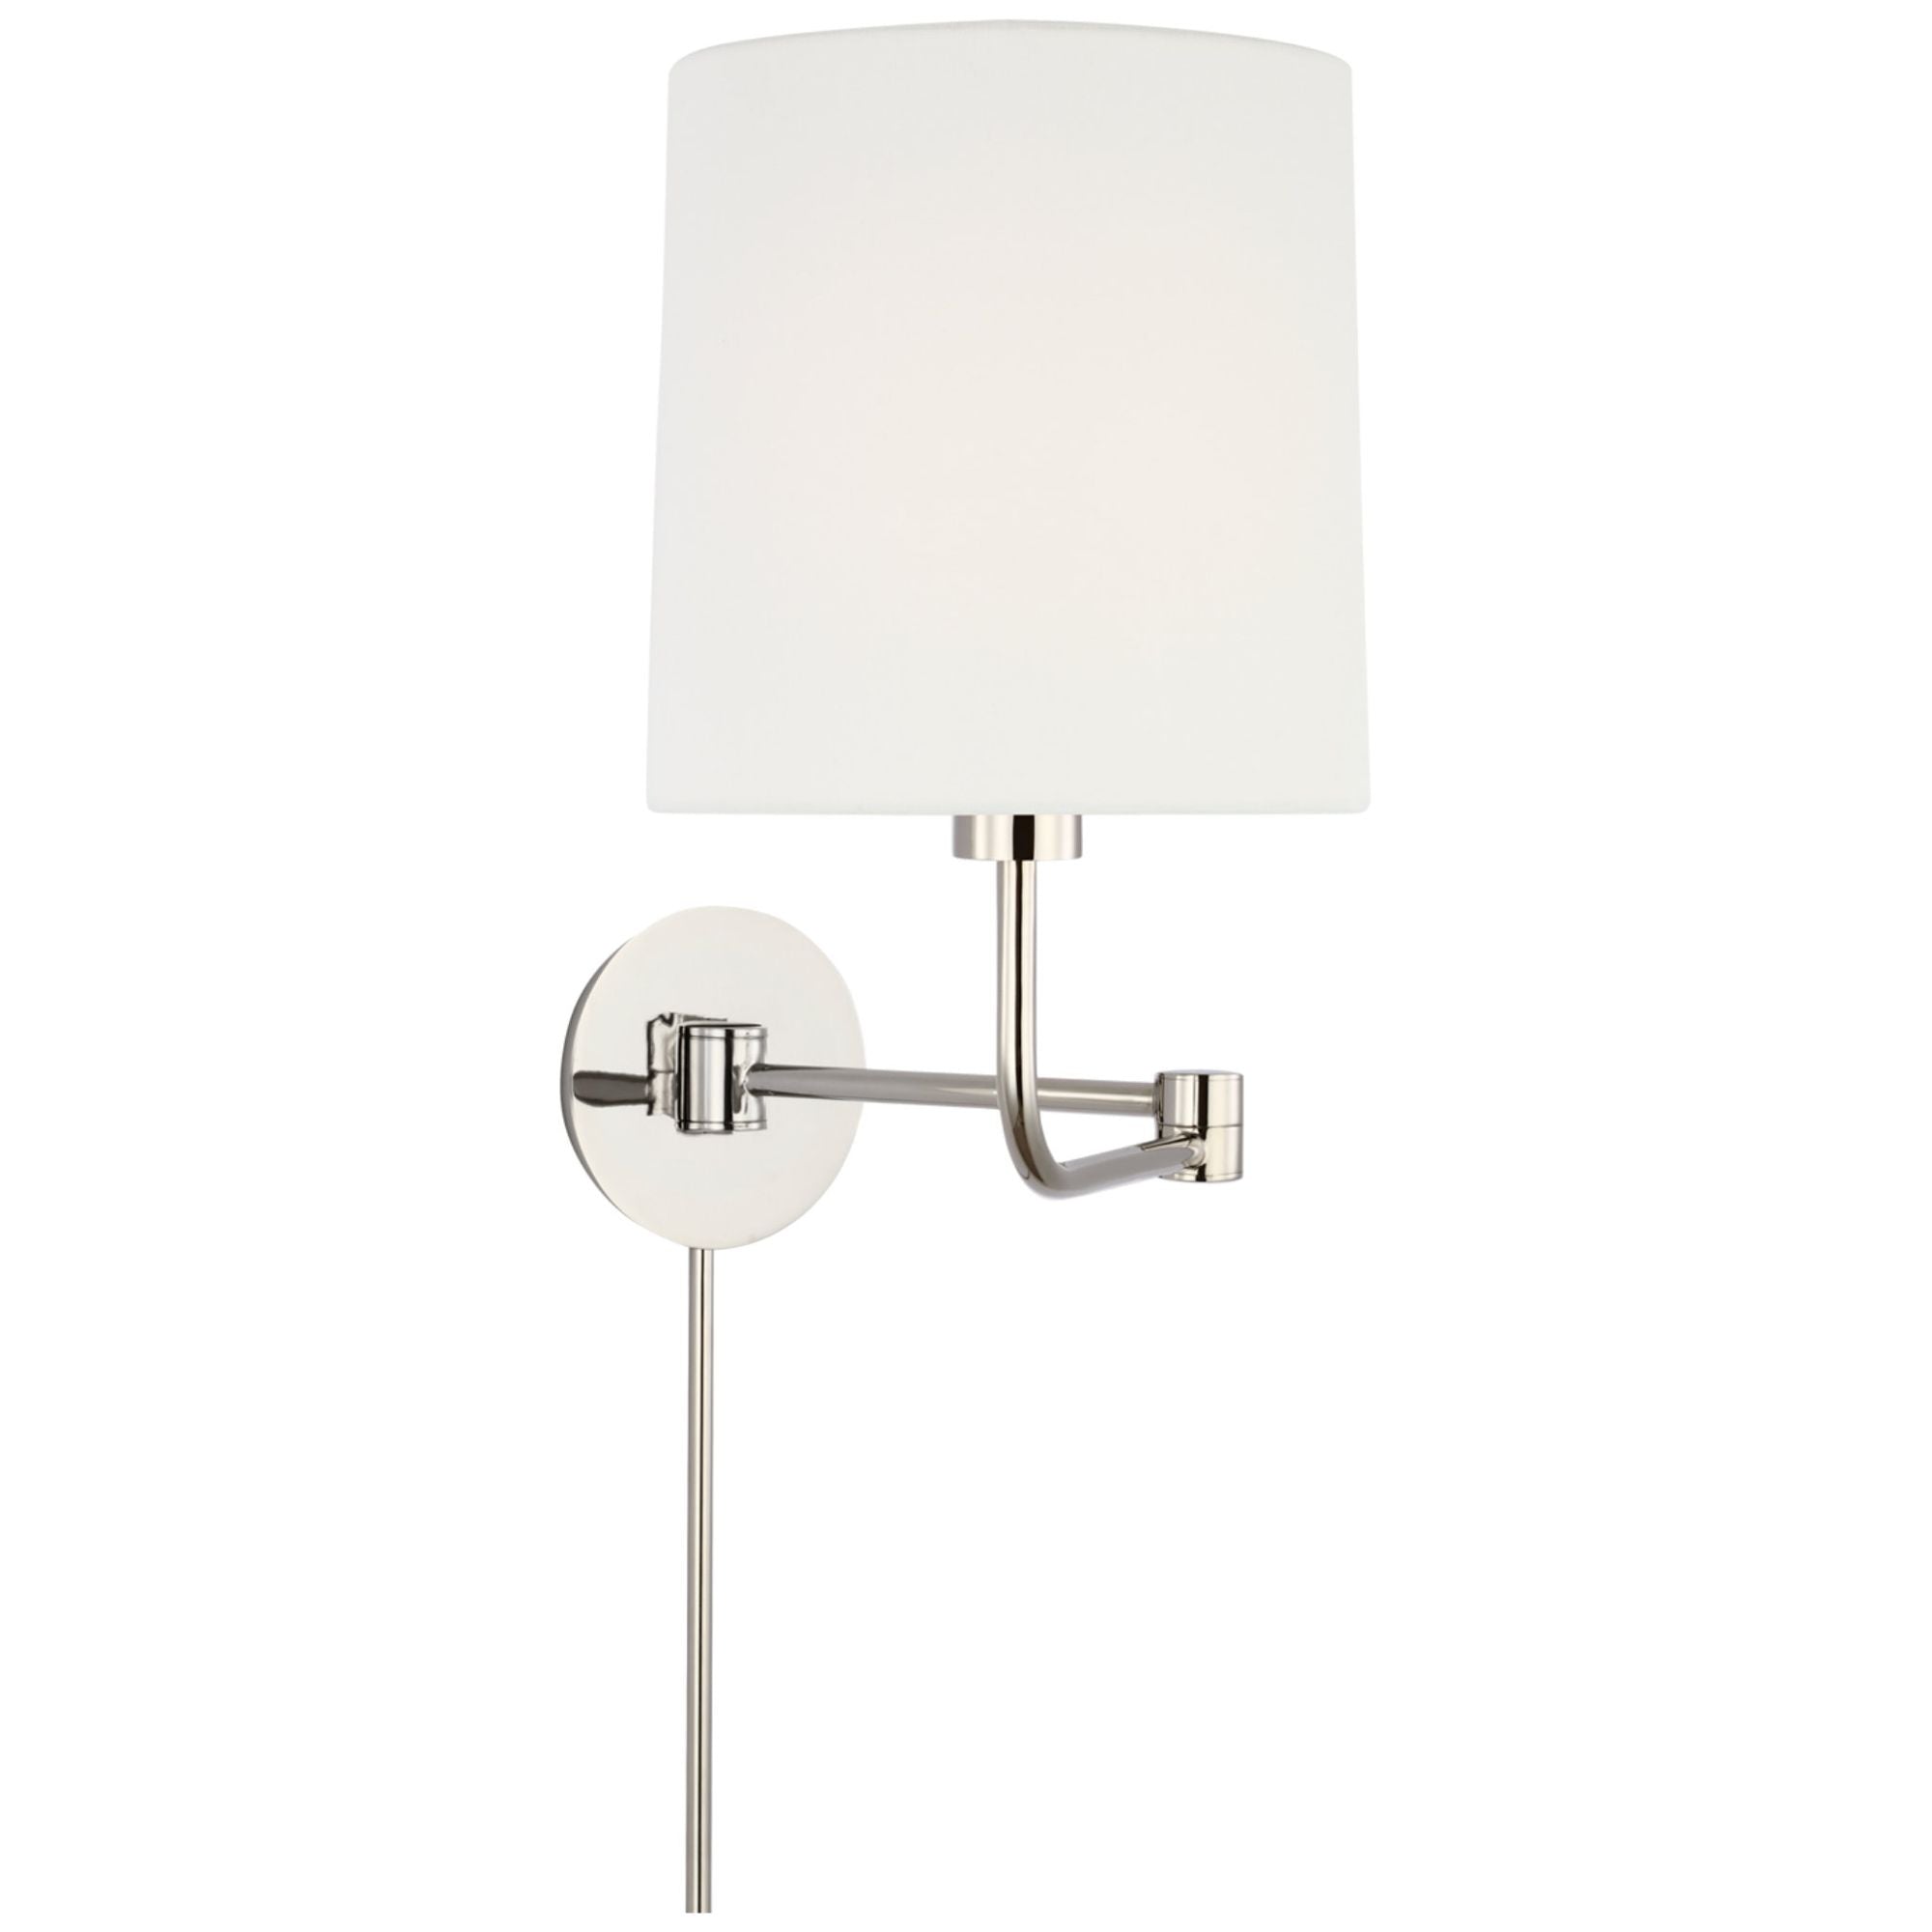 Barbara Barry Go Lightly Swing Arm Wall Light in Polished Nickel with Linen Shade